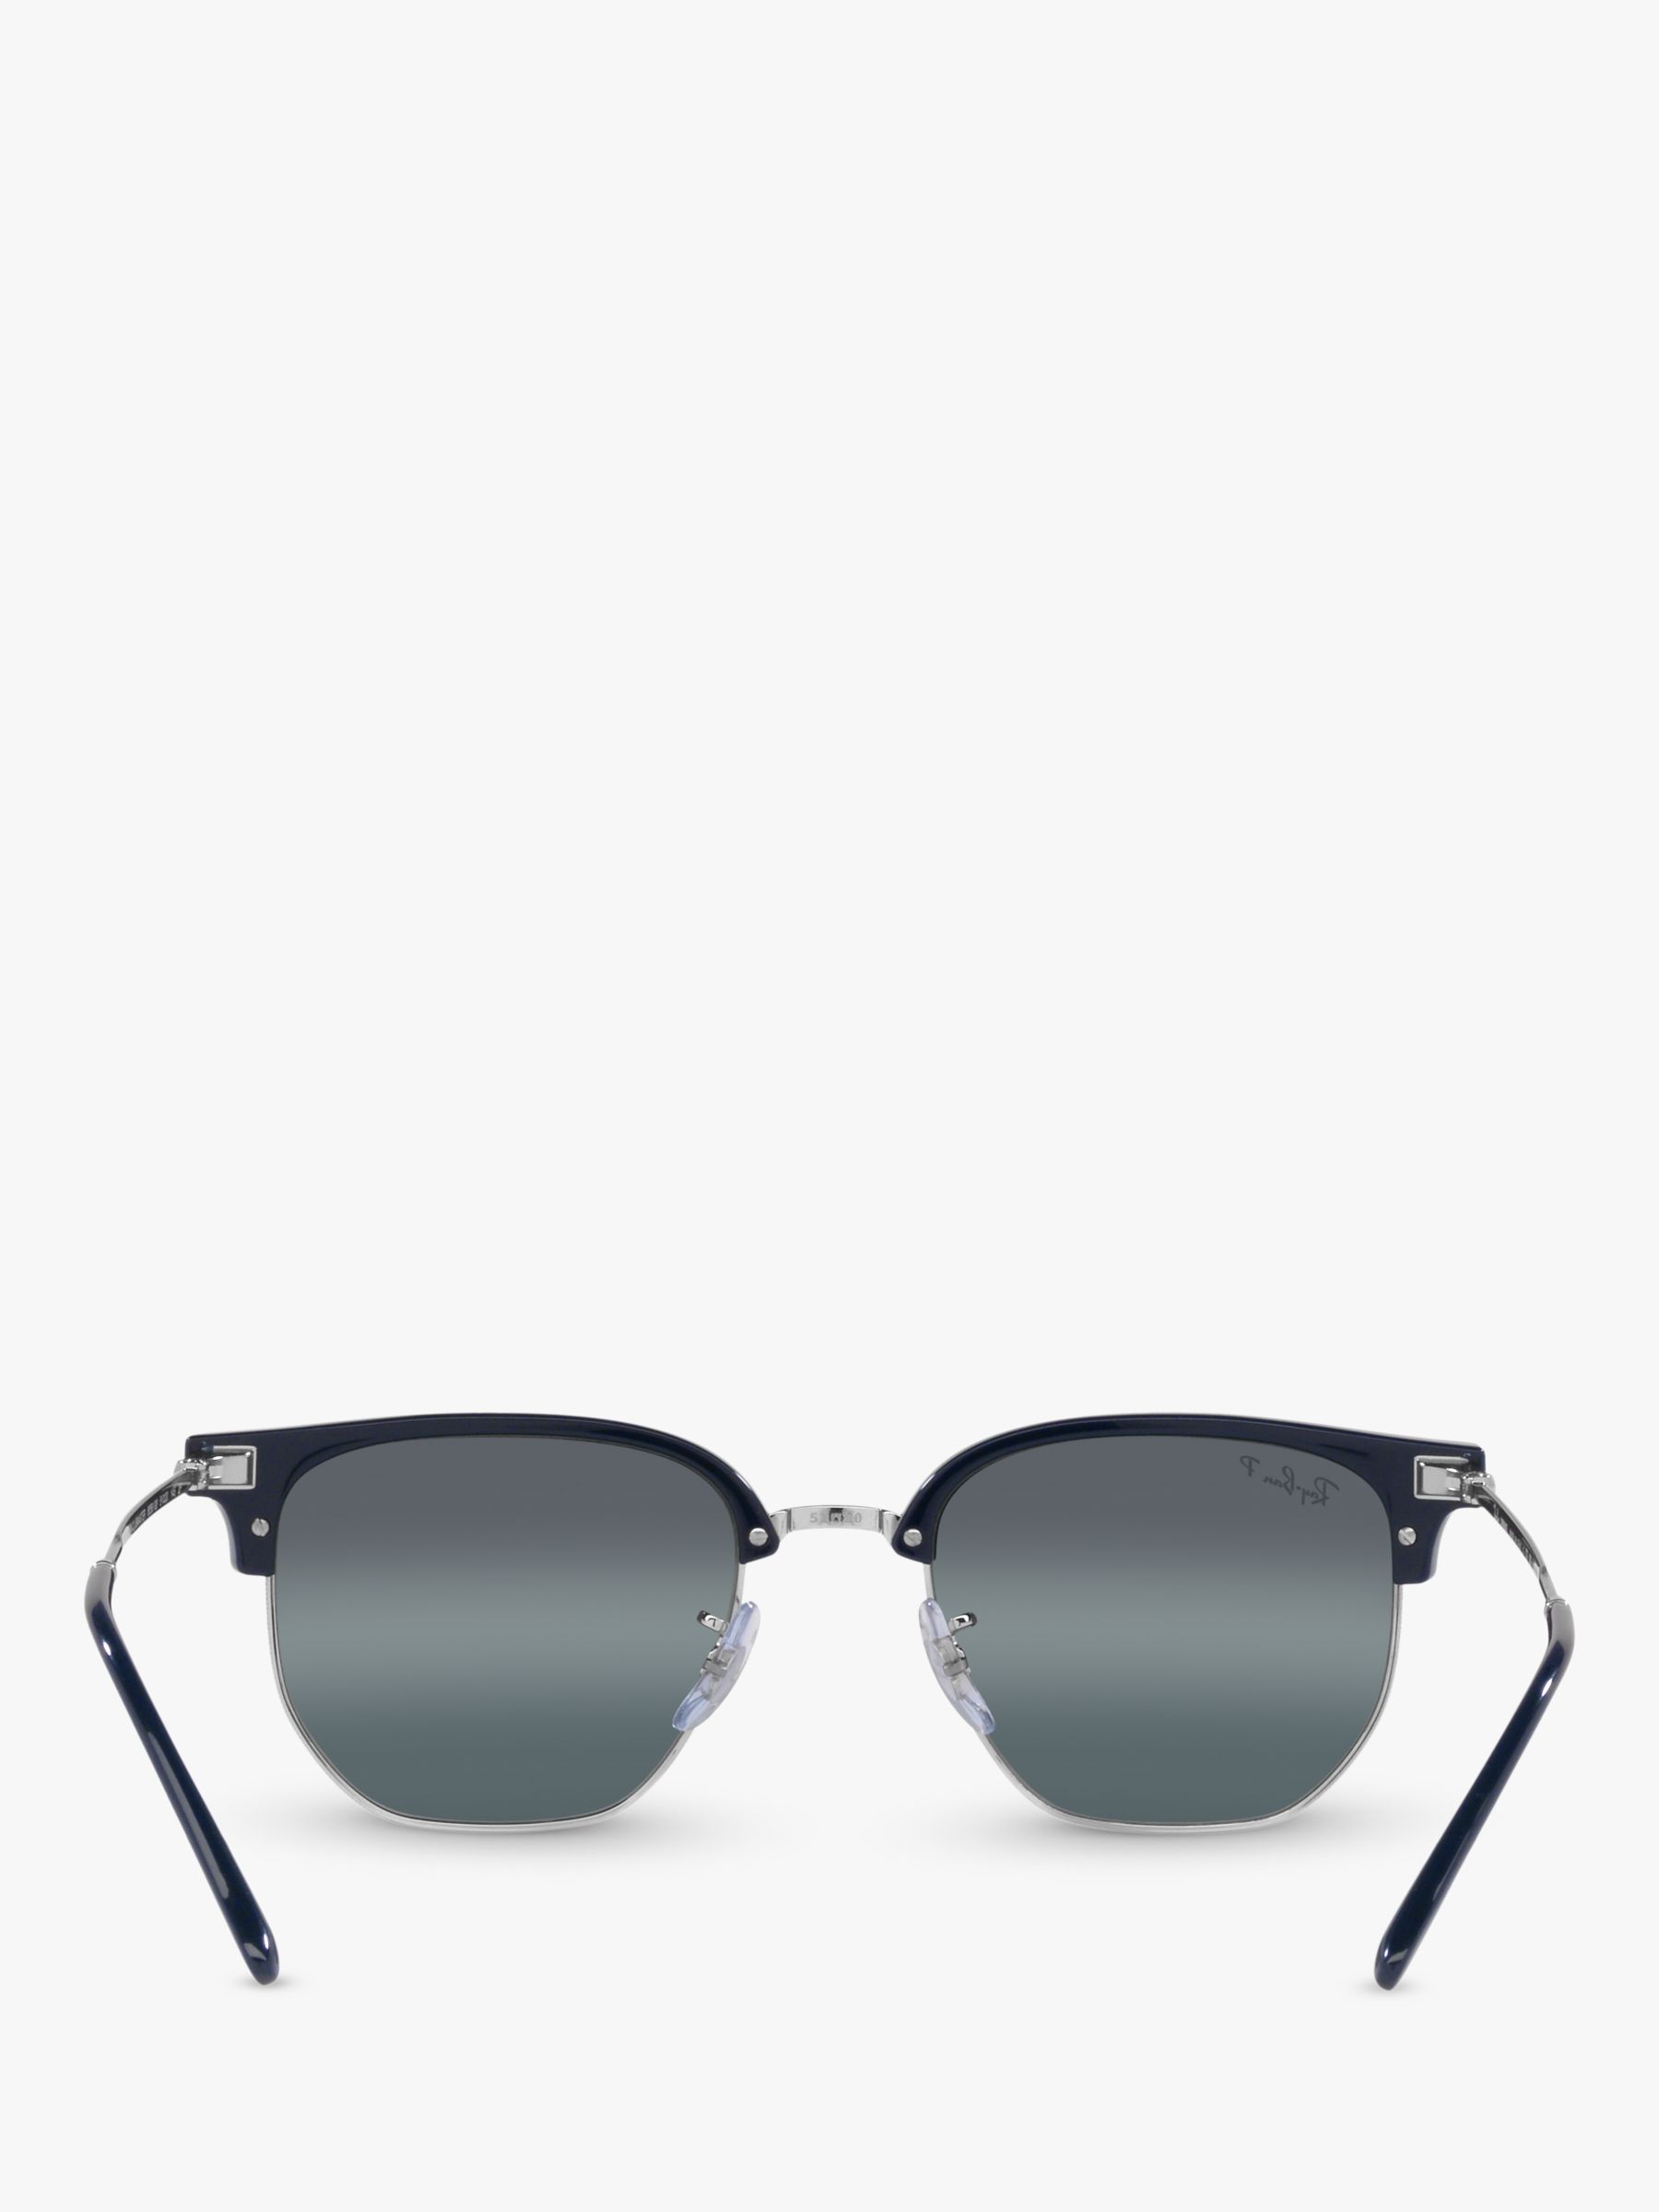 Buy Ray-Ban RB4416 New Clubmaster Sunglasses, Blue/Silver Online at johnlewis.com